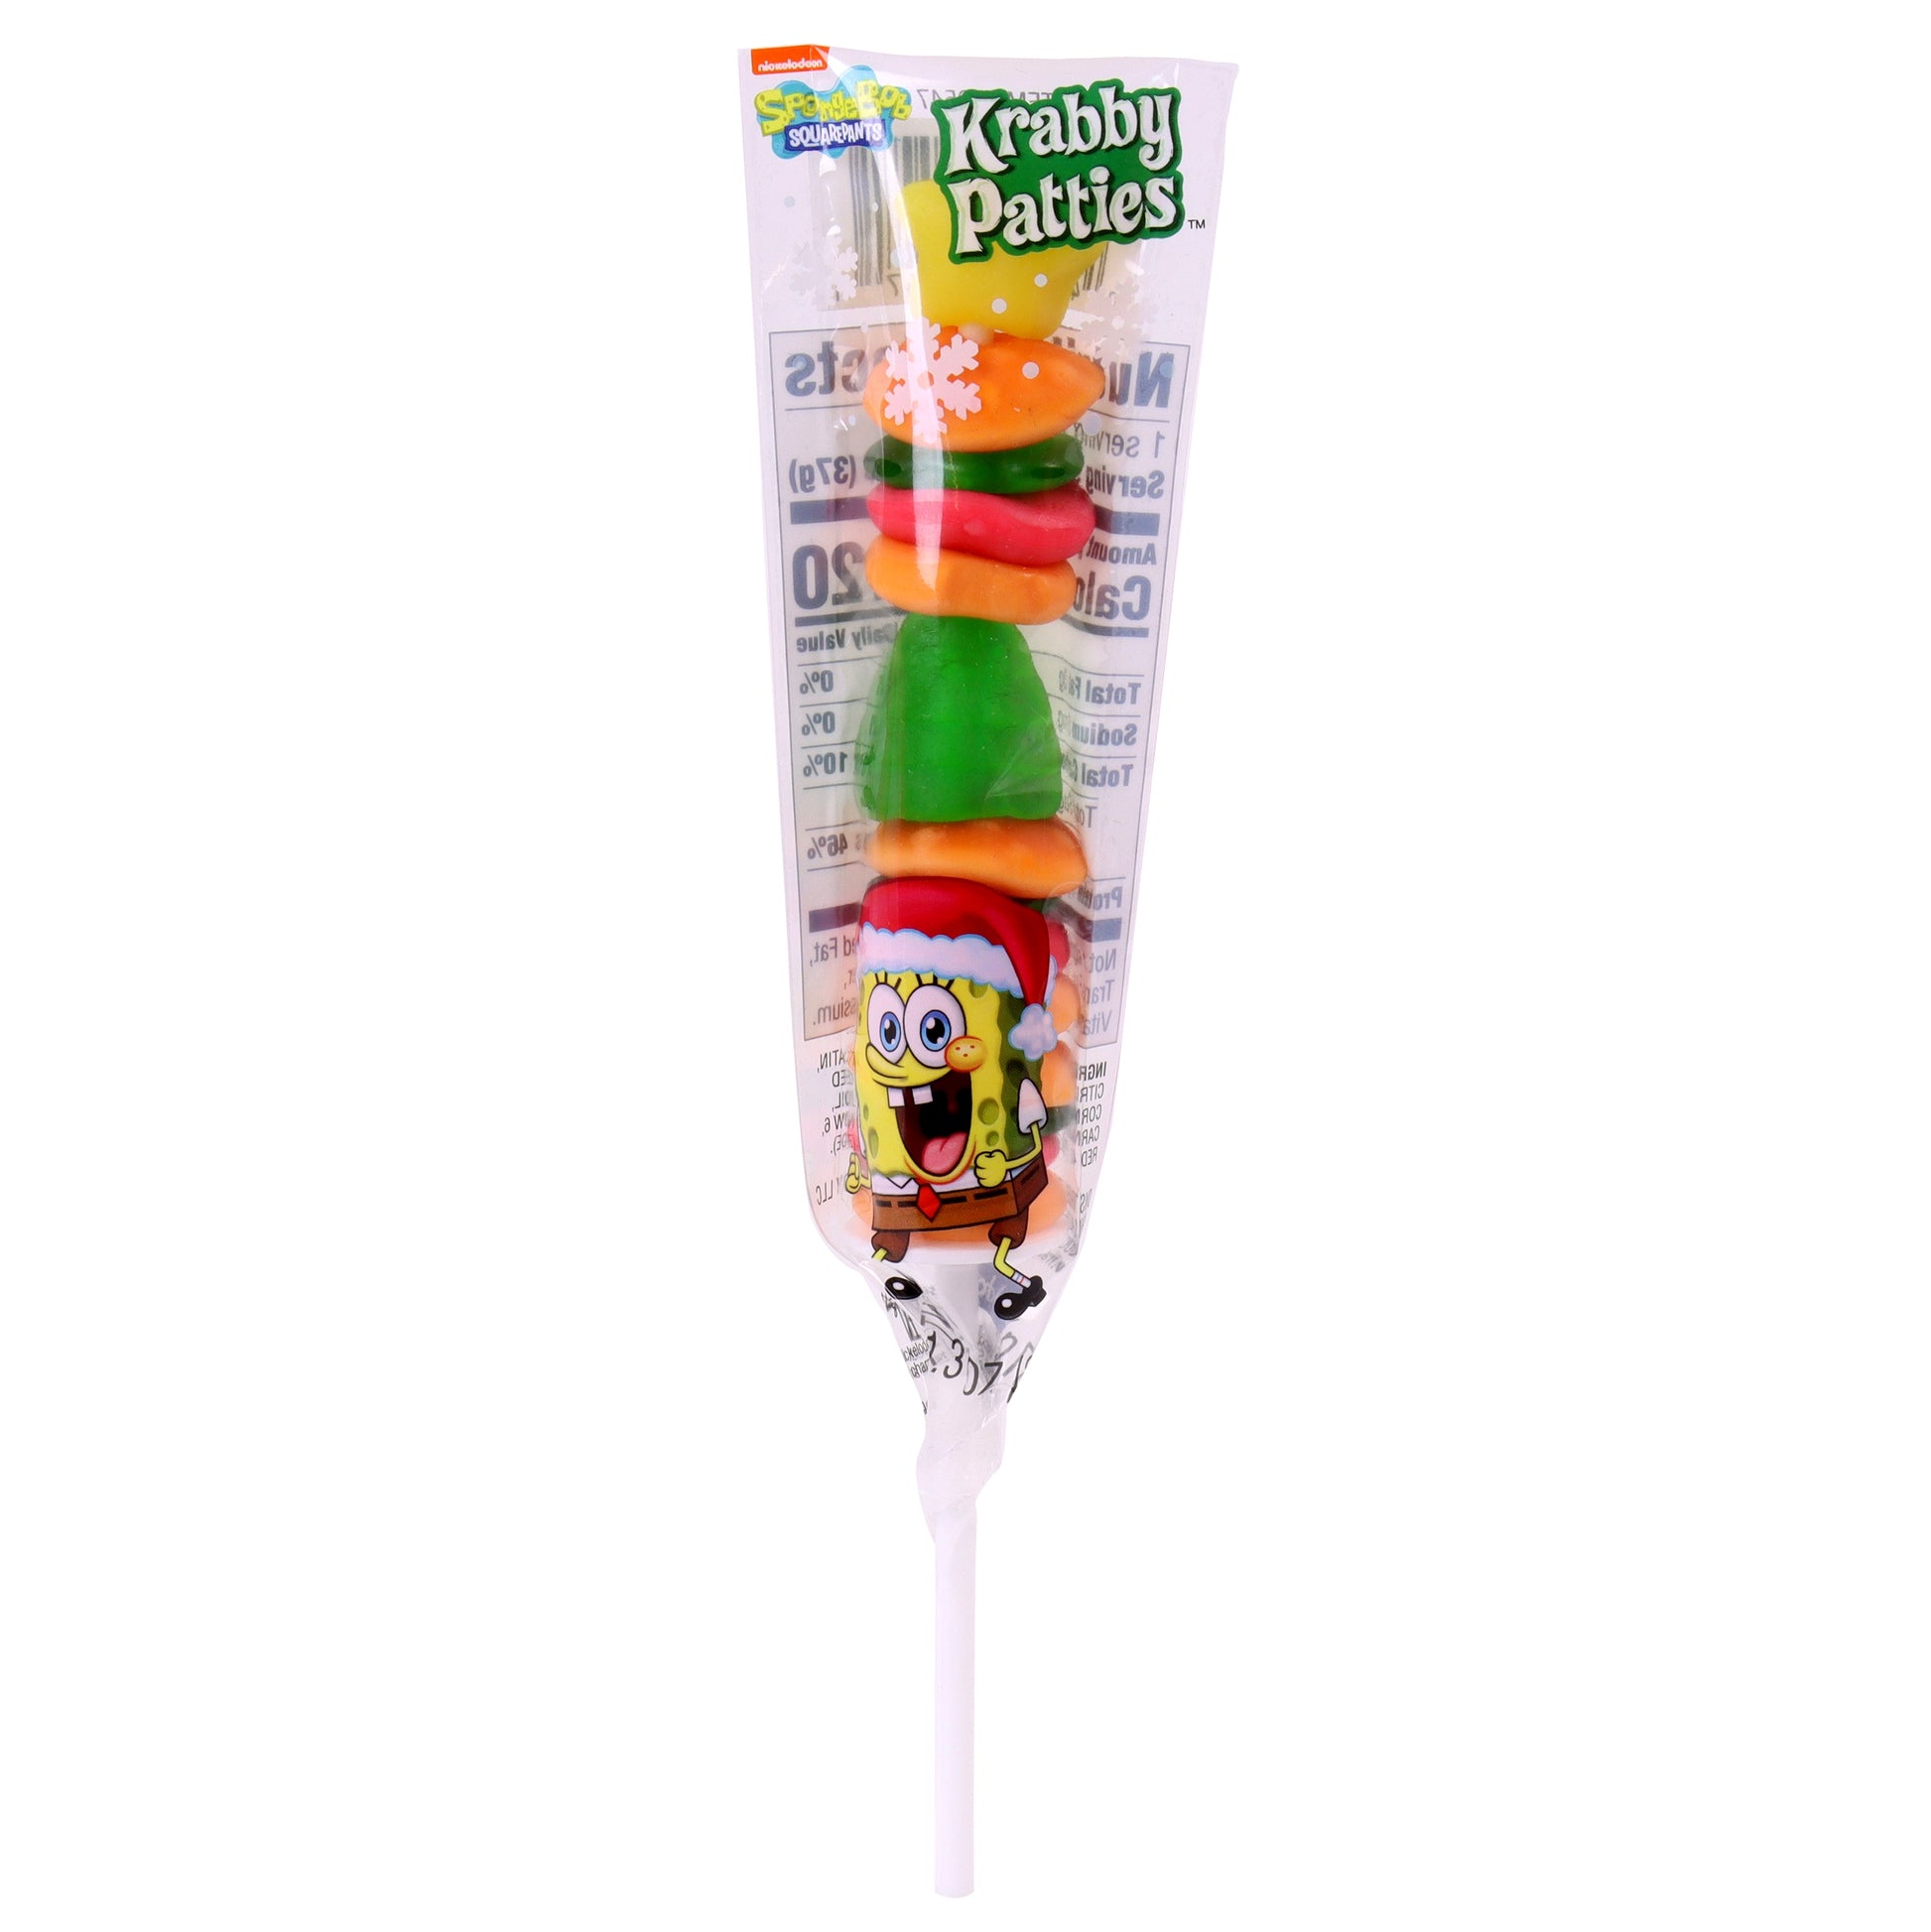 Individual kabob wrapped in Christmas themed plastic cover